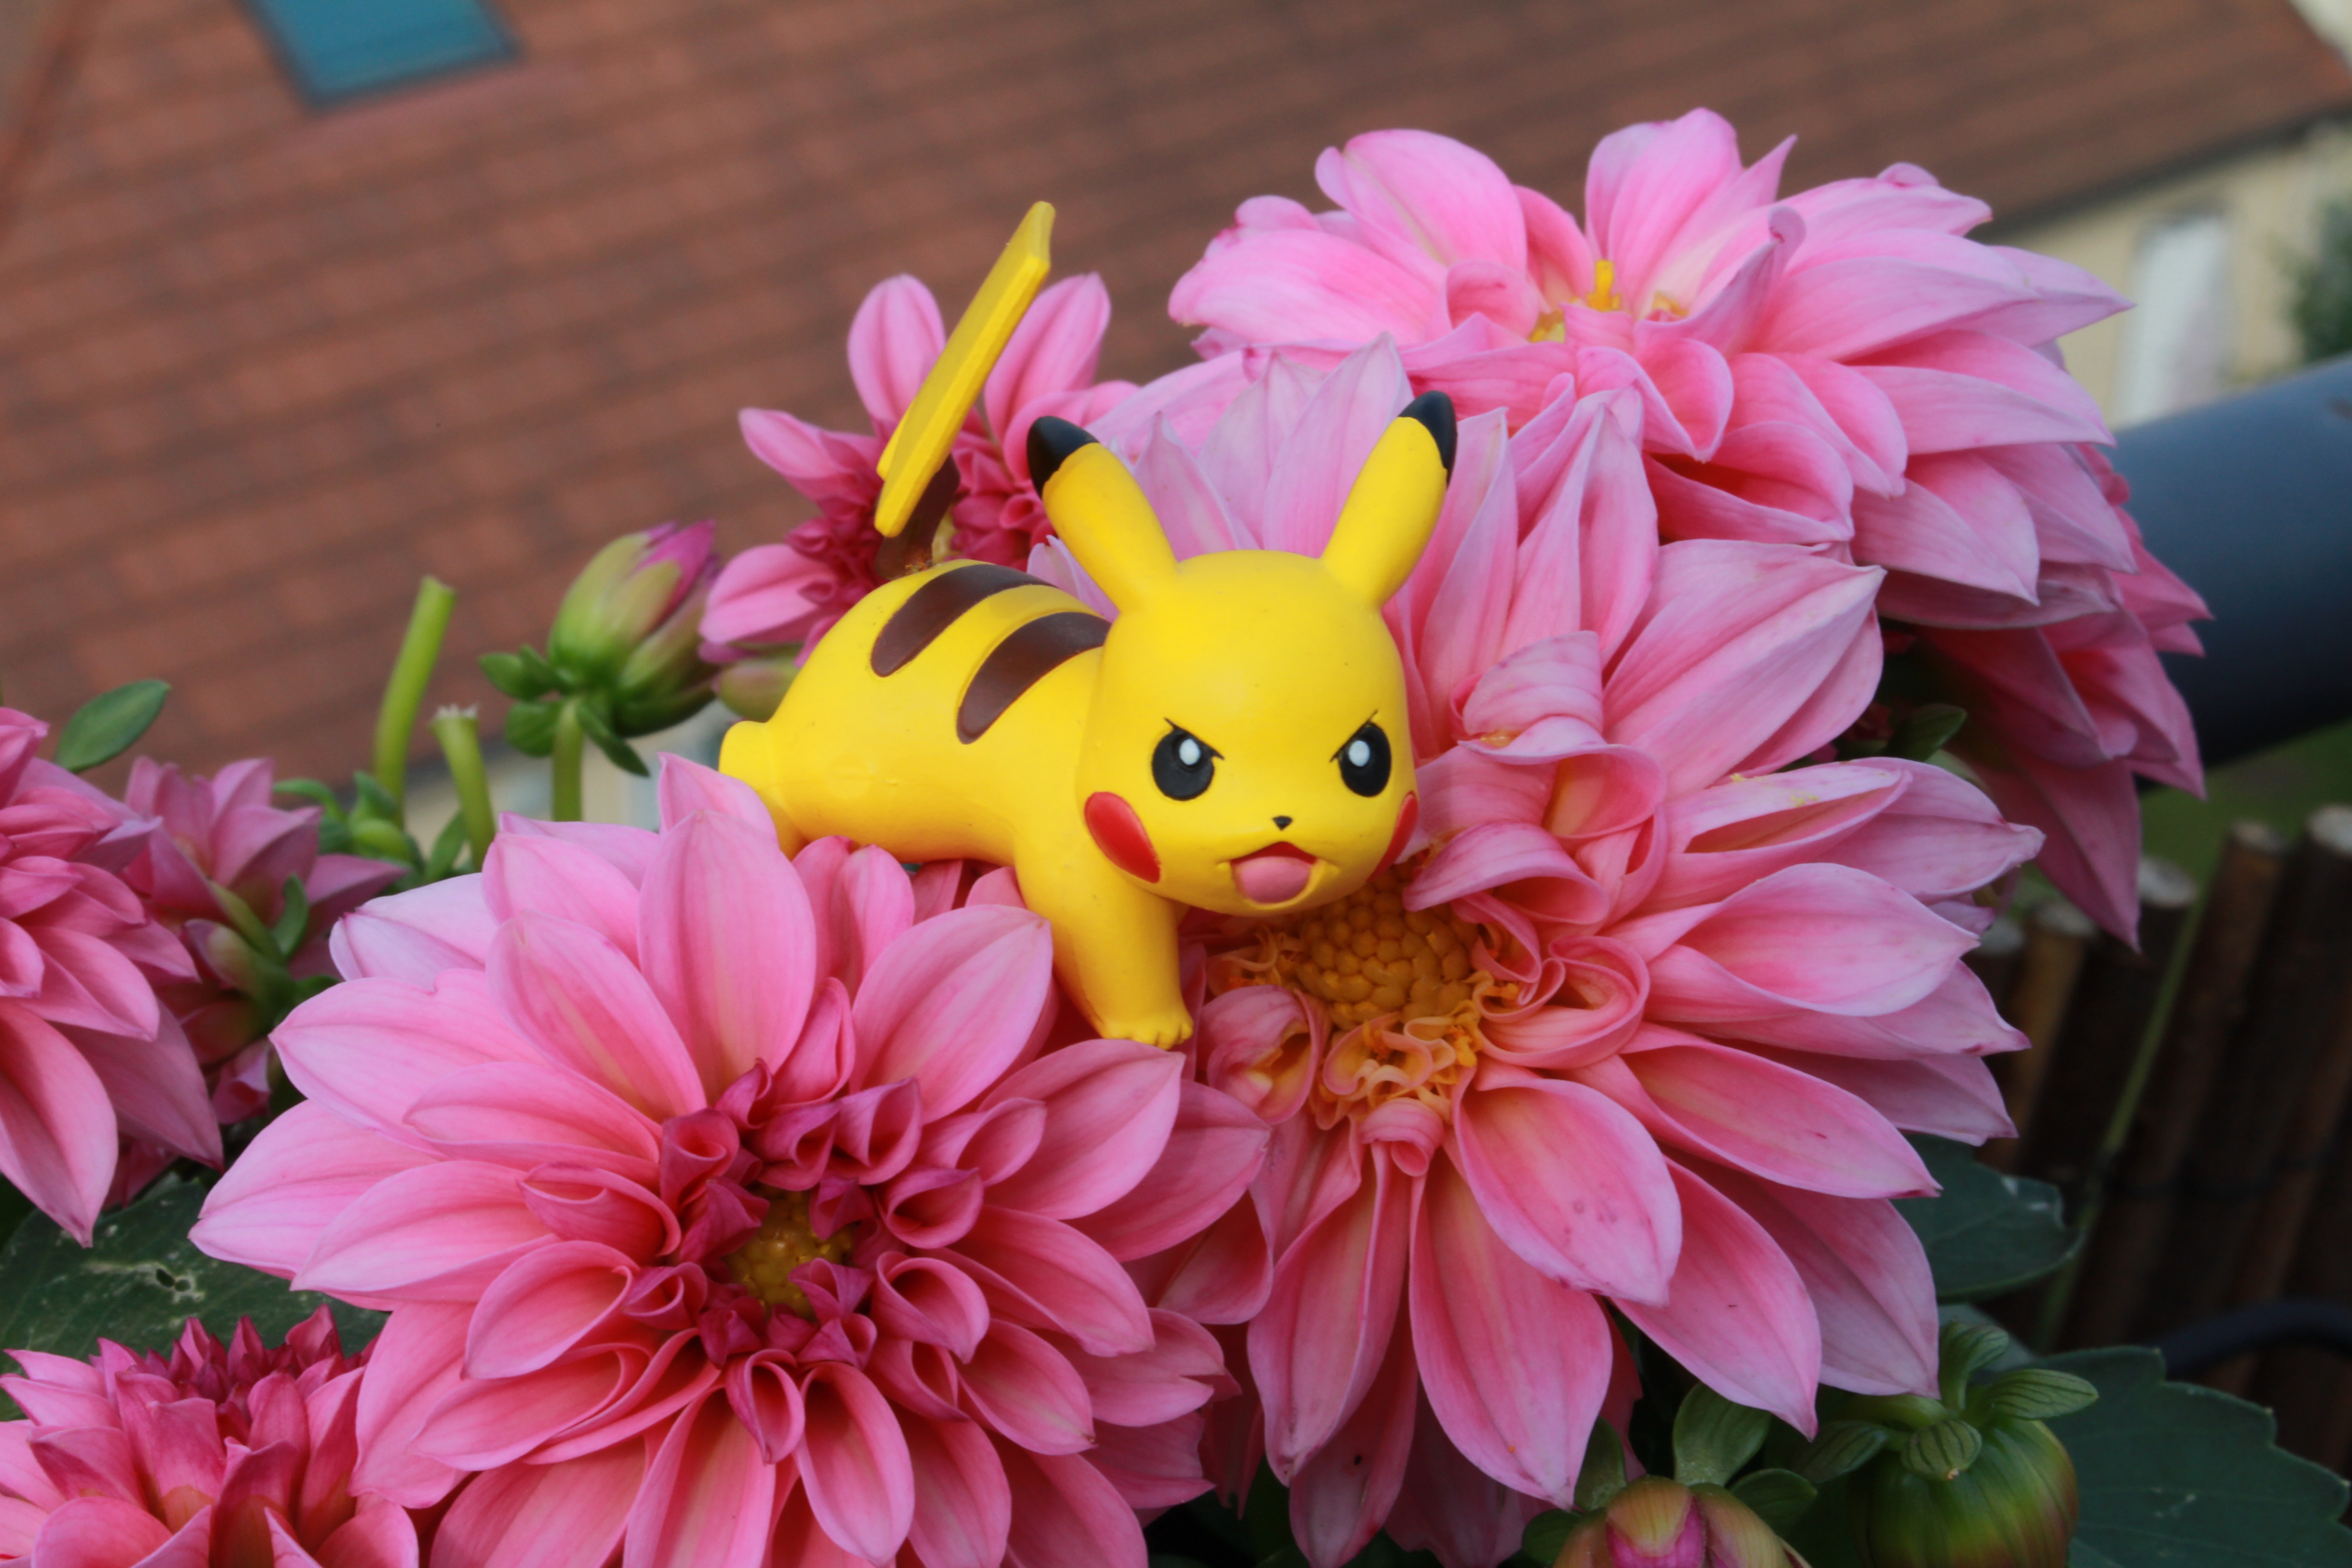 Pink flowers with pikachu on them.